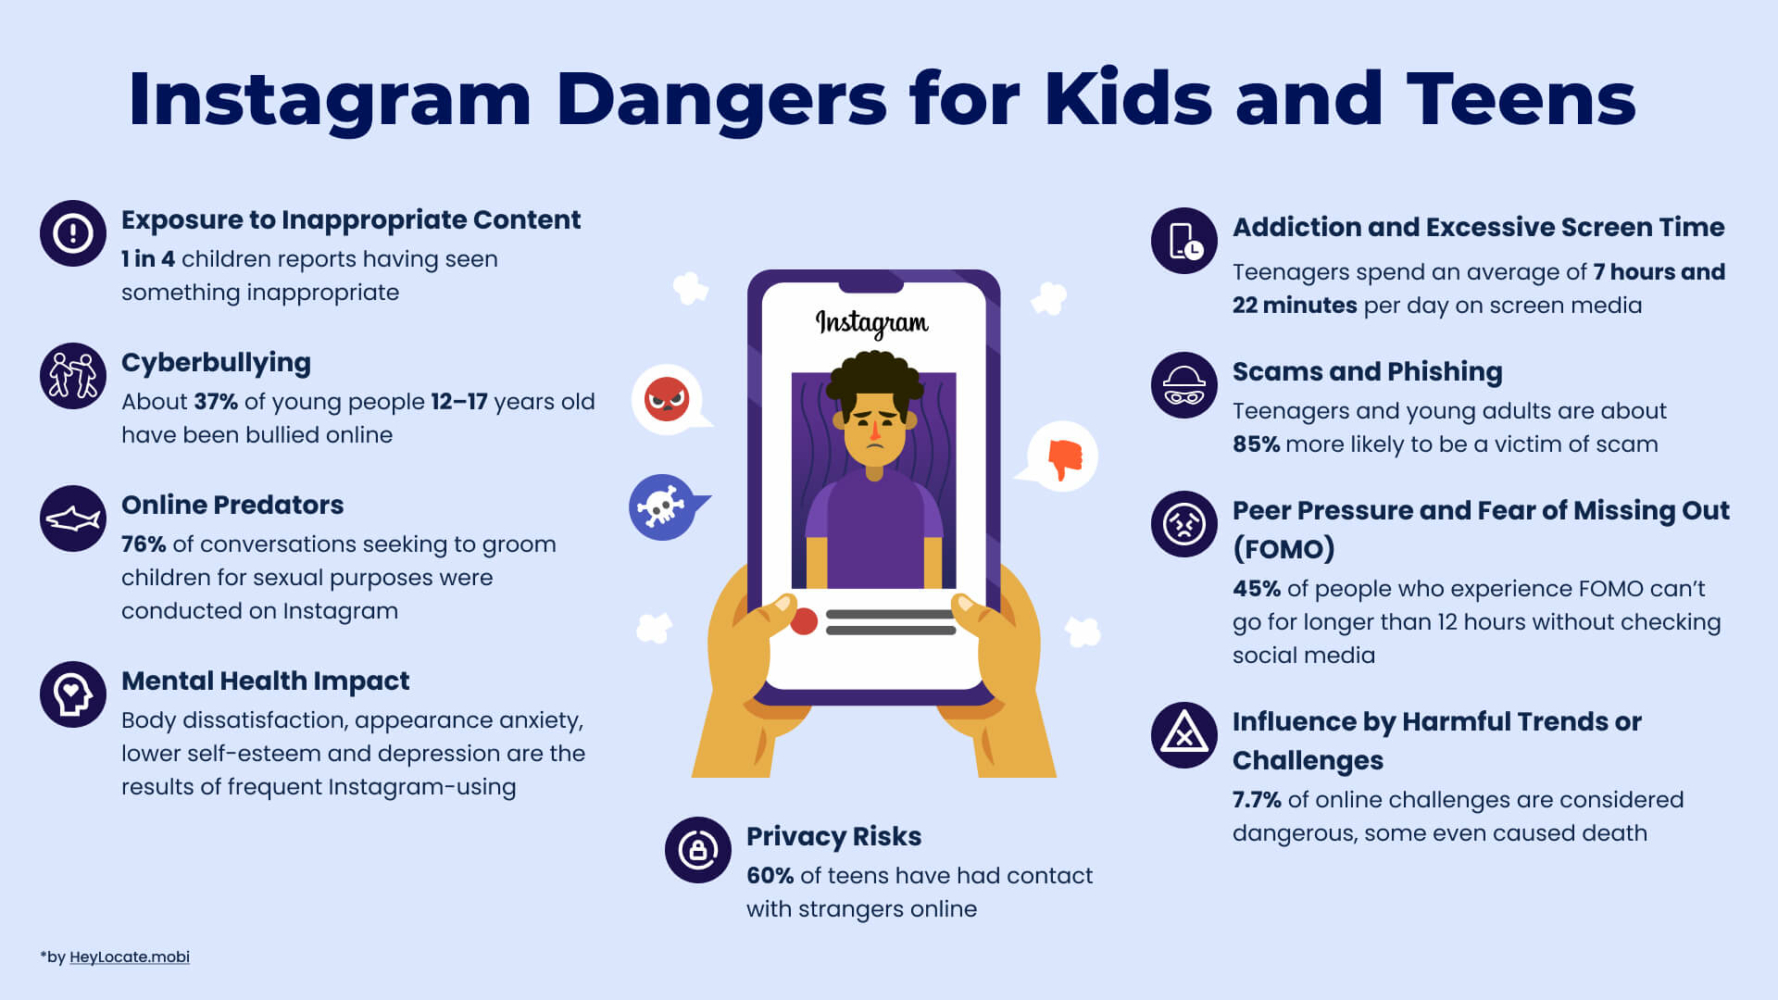 List of Instagram dangers for kids and teens showed on the infographic by HeyLocate.mobi